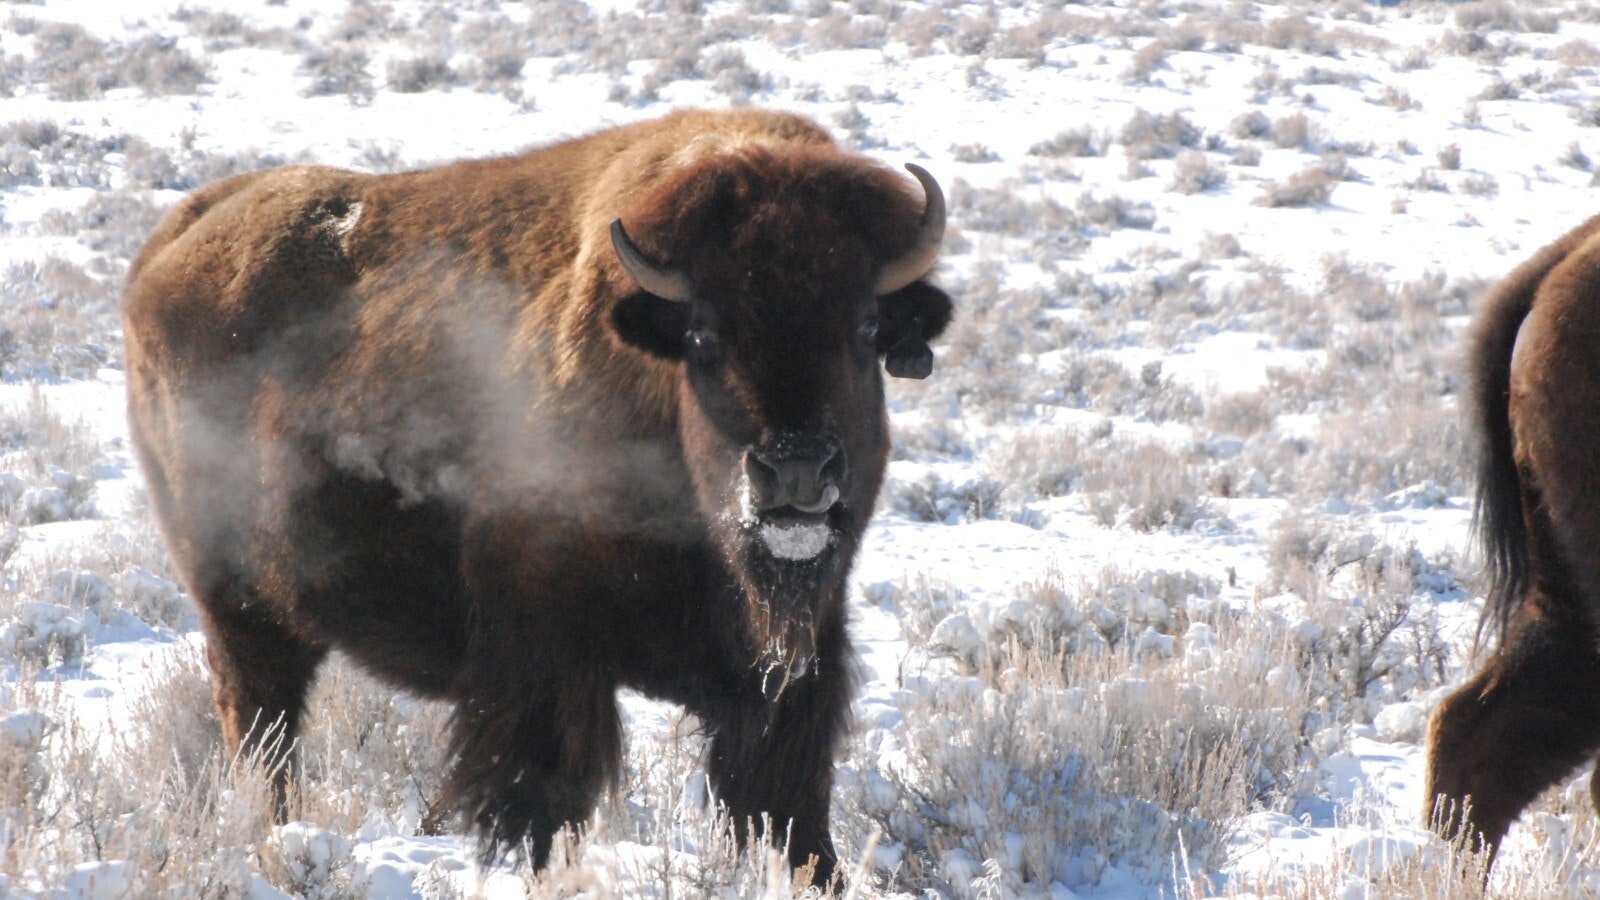 WY Buffalo in Hot Springs State Park